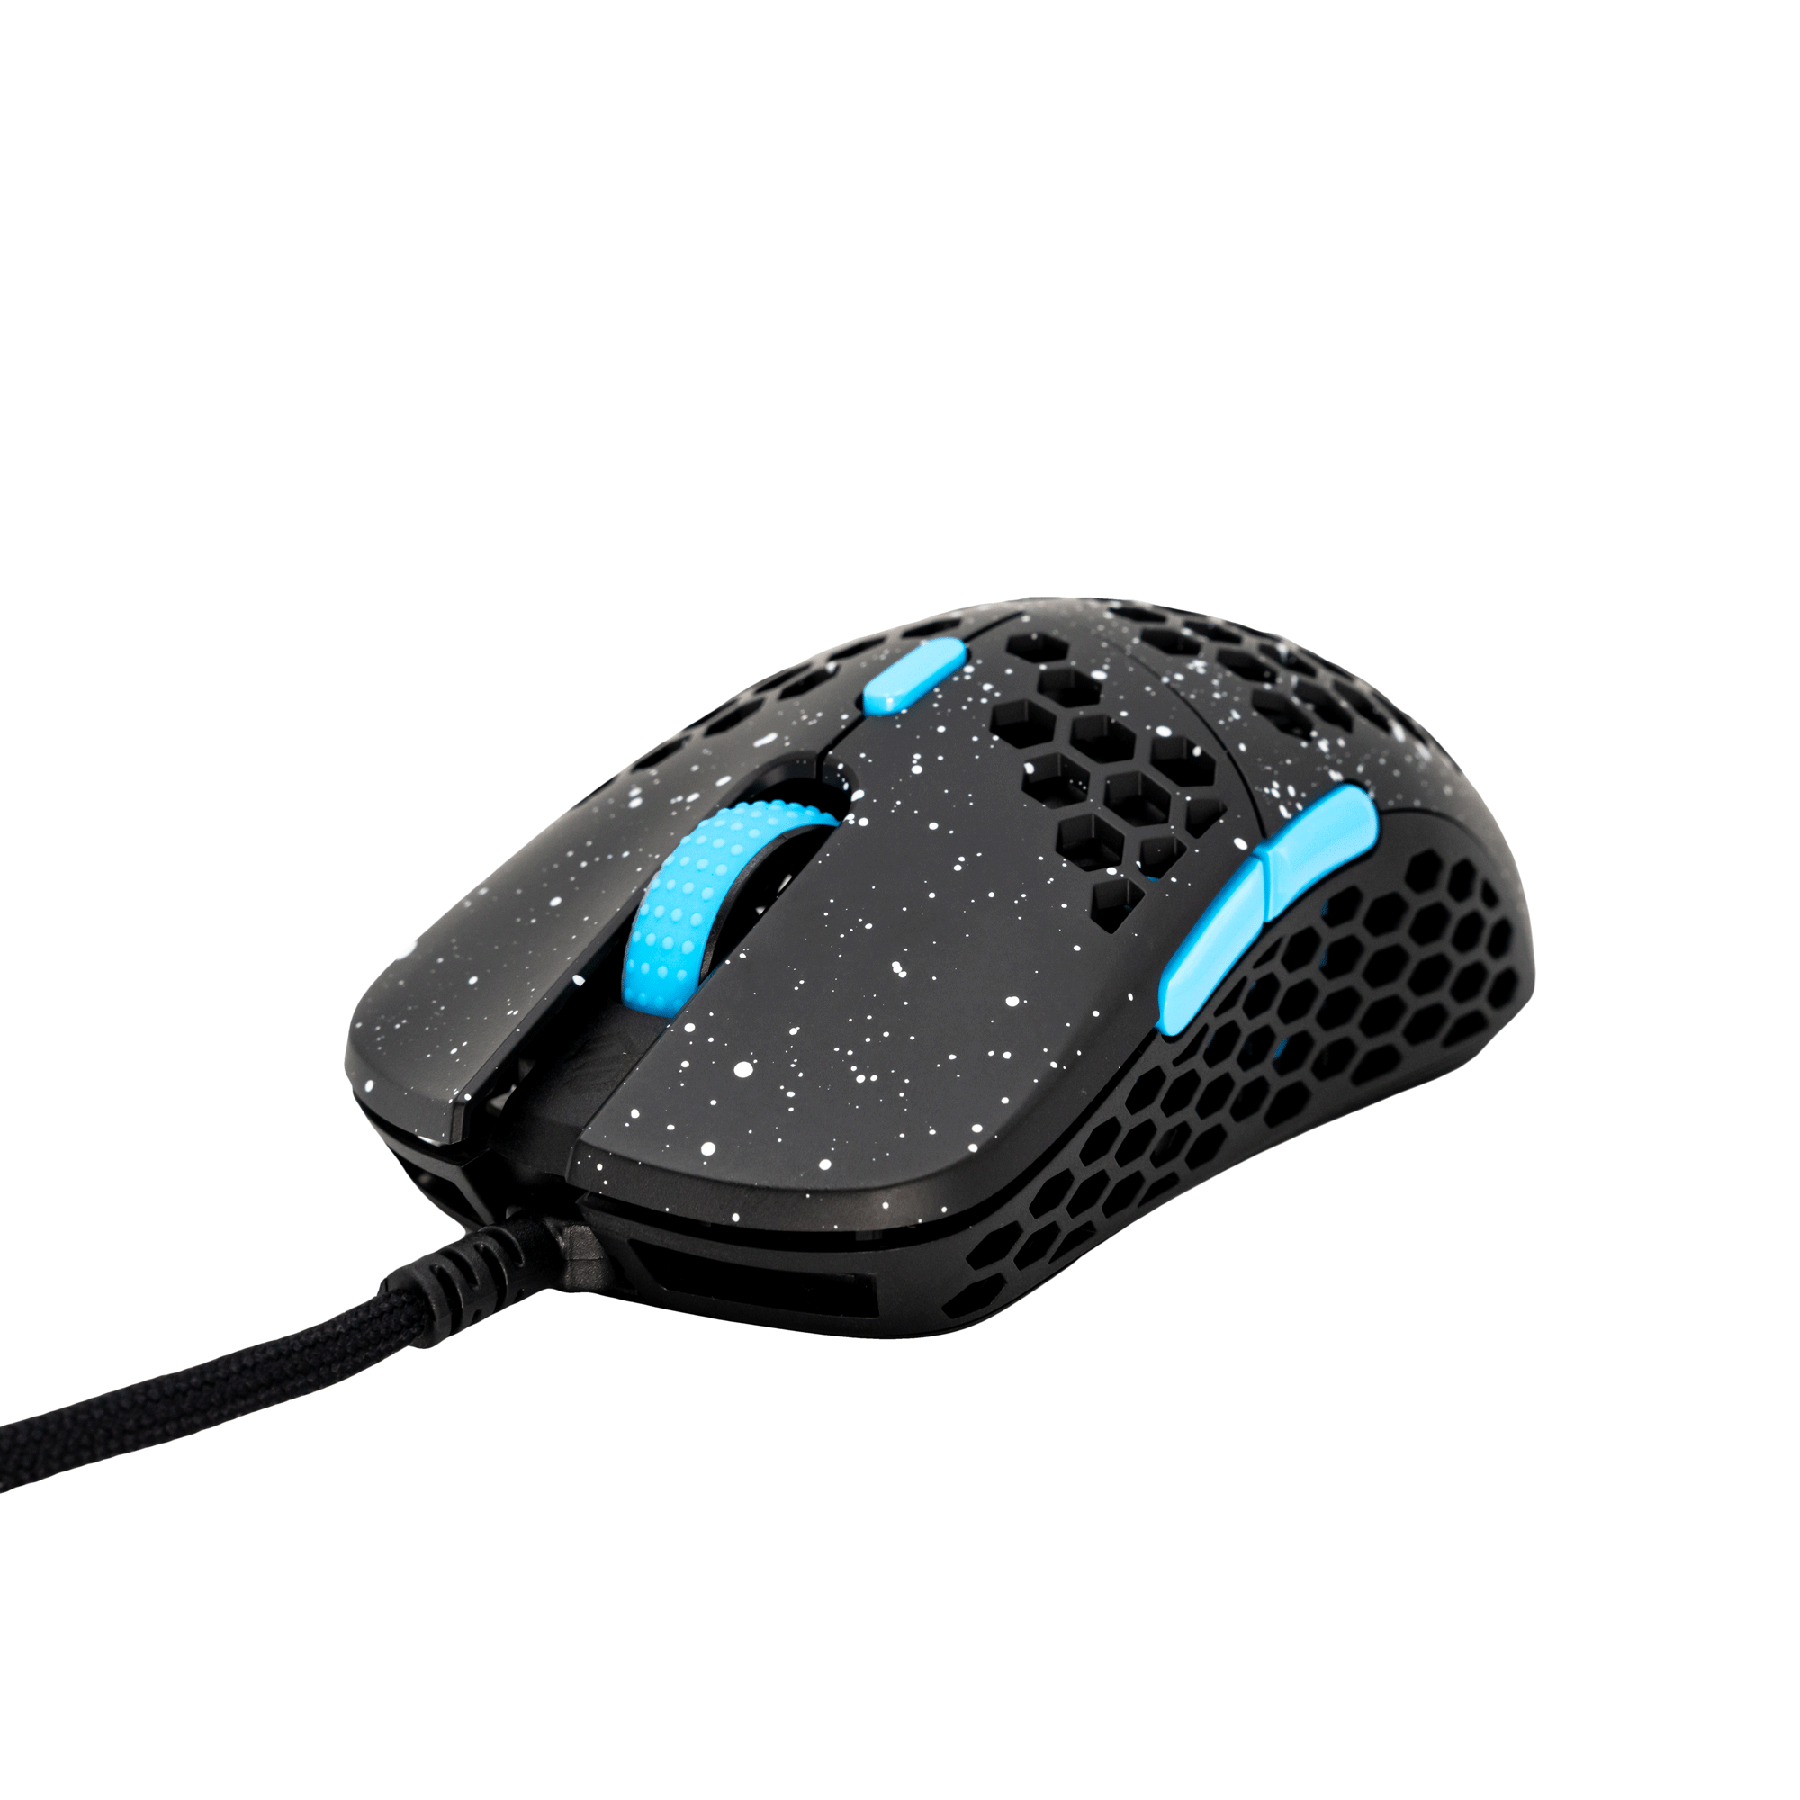 Hati-S HTS ACE Wired Gaming Mouse up to 16000 DPI - 3389 Performance S